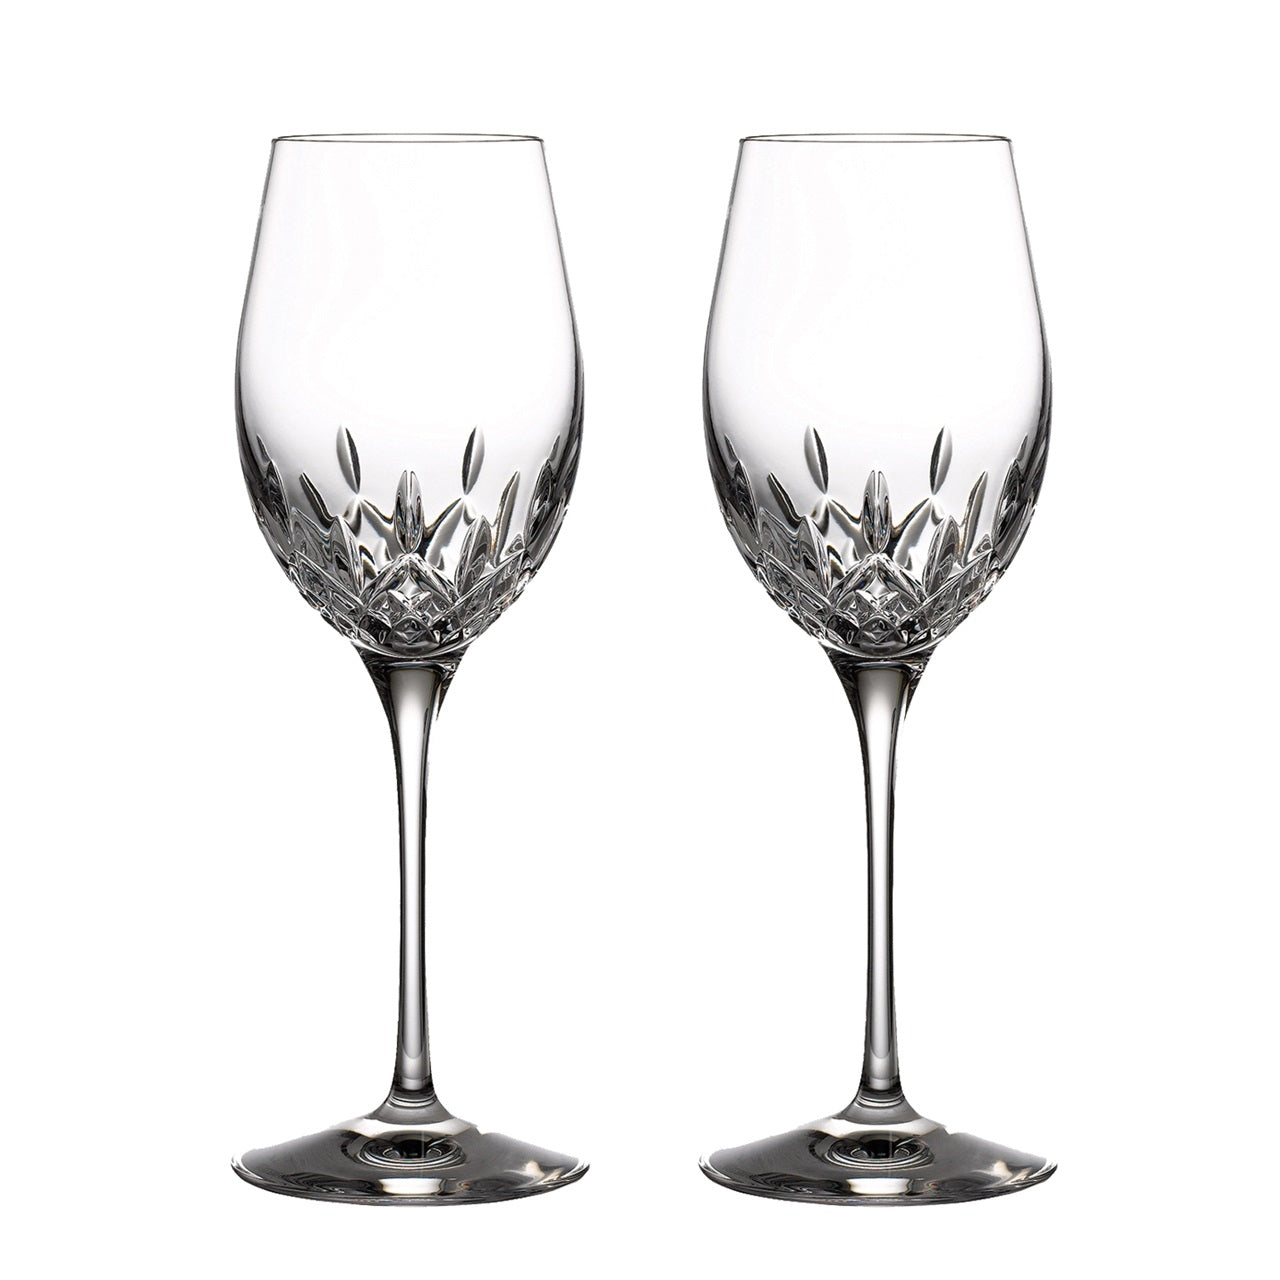 Waterford Crystal Lismore Essence White Wine Glass Pair  Indulge in this stylish set Lismore Essence White Wine glasses and share your favorite Chardonnay or Chenin Blanc with friends and family.